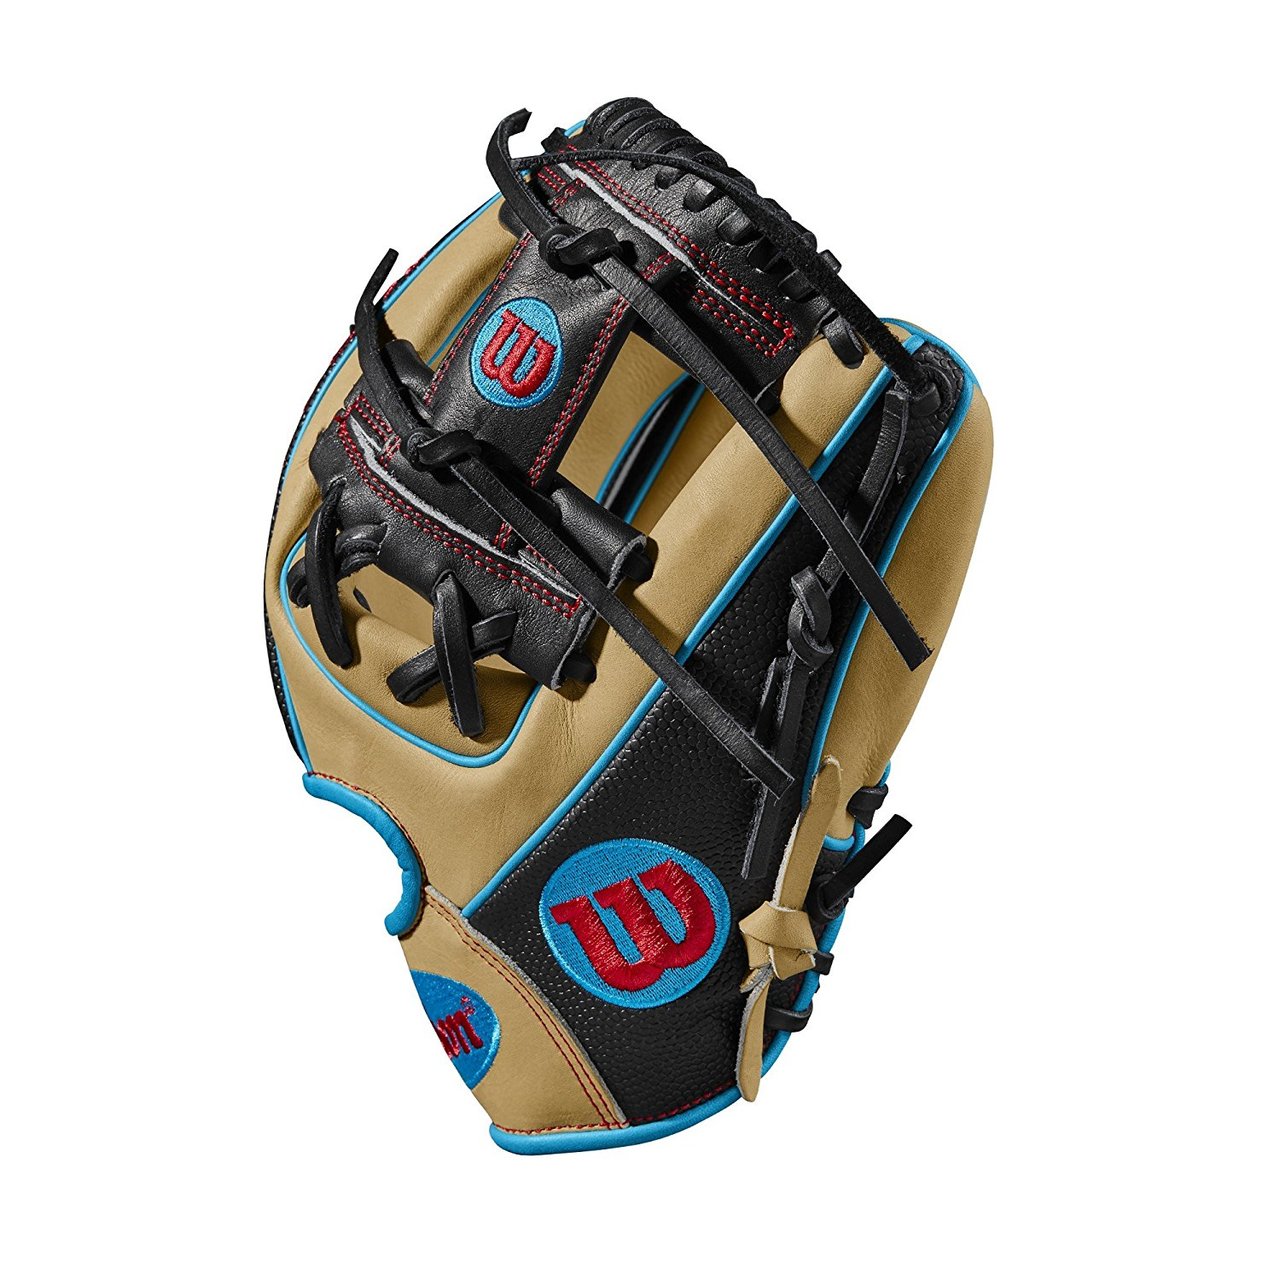 The 2018 A2000 DP15 SS is a new model in Wilson's Pedroia Fit line-up, which are built with the patented Pedroia Fit to better suit players with smaller hands. This A2000 DP15 SS, made with Black SuperSkin, and Blonde and Tropical Blue Pro Stock Leather, has a smaller hand opening and more narrow finger stalls to fit smaller hands -- but all the same craftsmanship you expect in an A2000.     The Wilson A2000, the most famous baseball glove in the game, continues to improve. Master Craftsman Shigeaki Aso and his glove team are constantly refining Pro Stock patterns with the insights of players from back fields to Major League stadiums to bring the best possible product to the diamond. Made with Pro Stock leather identified specifically for Wilson gloves for its durability and unmatched feel, A2000s are built to break in perfectly and last for multiple seasons. It's the perfect ball glove for hard-working players.       